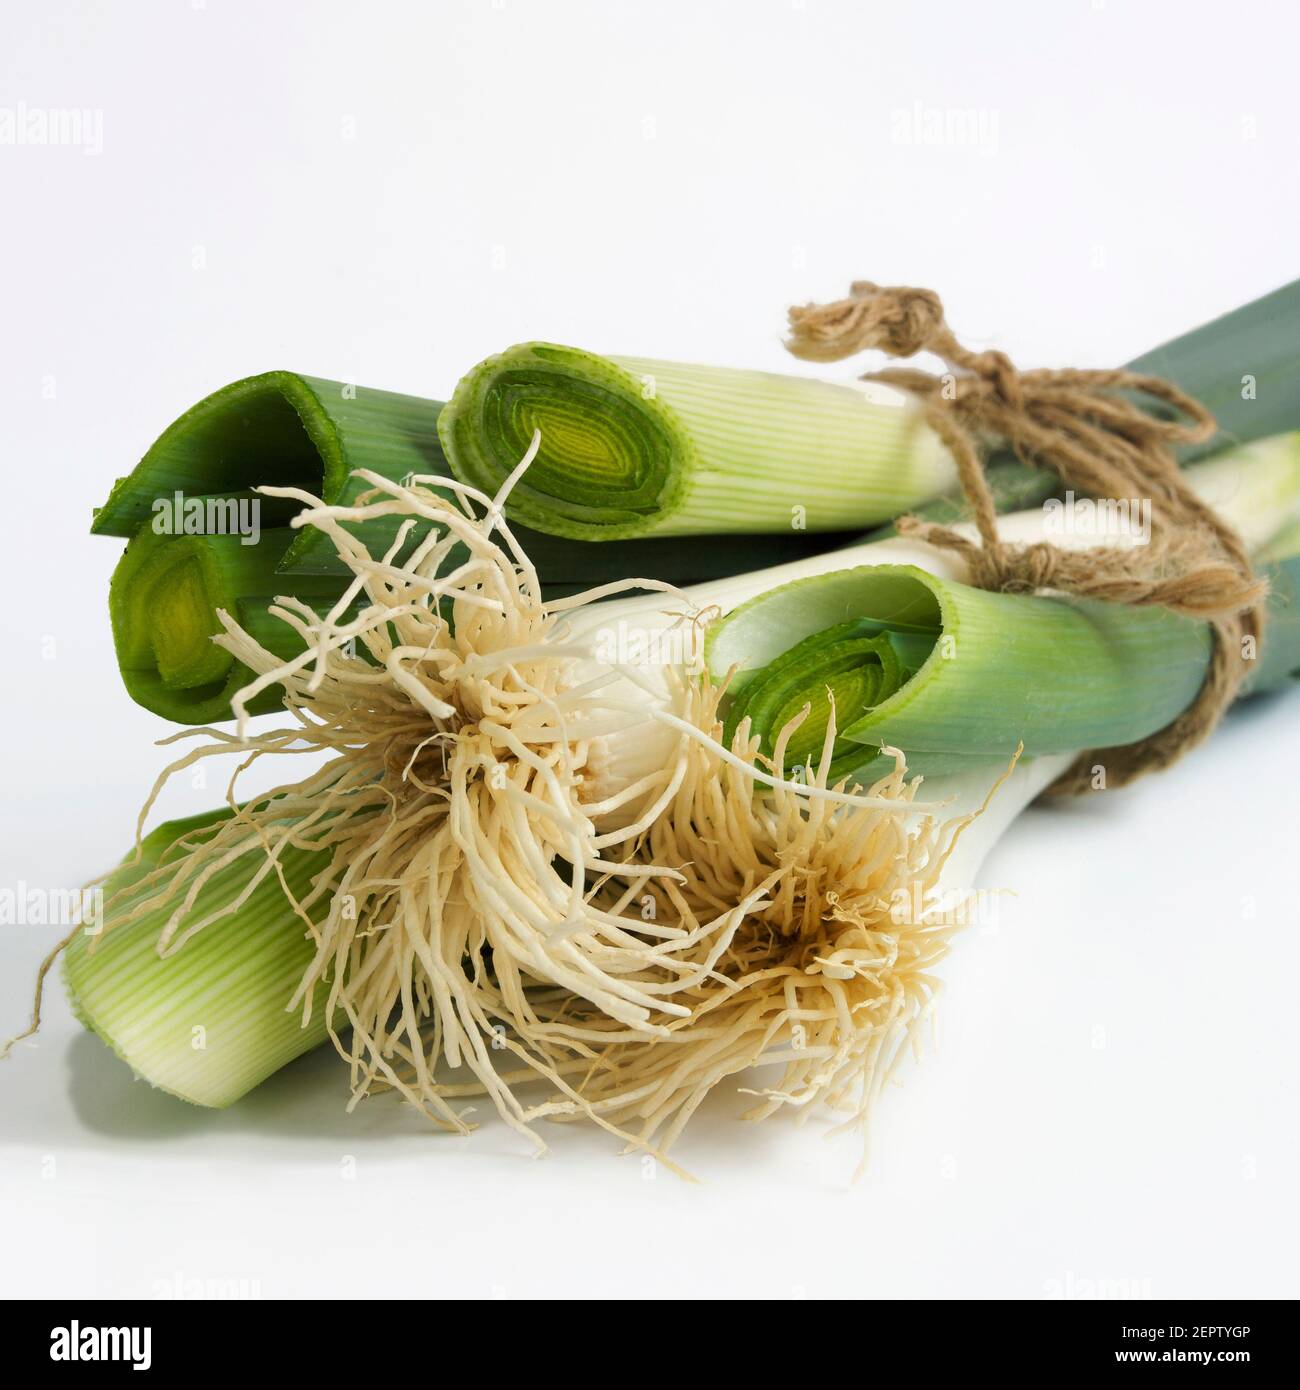 Cut leeks tied with string, on a white background Stock Photo